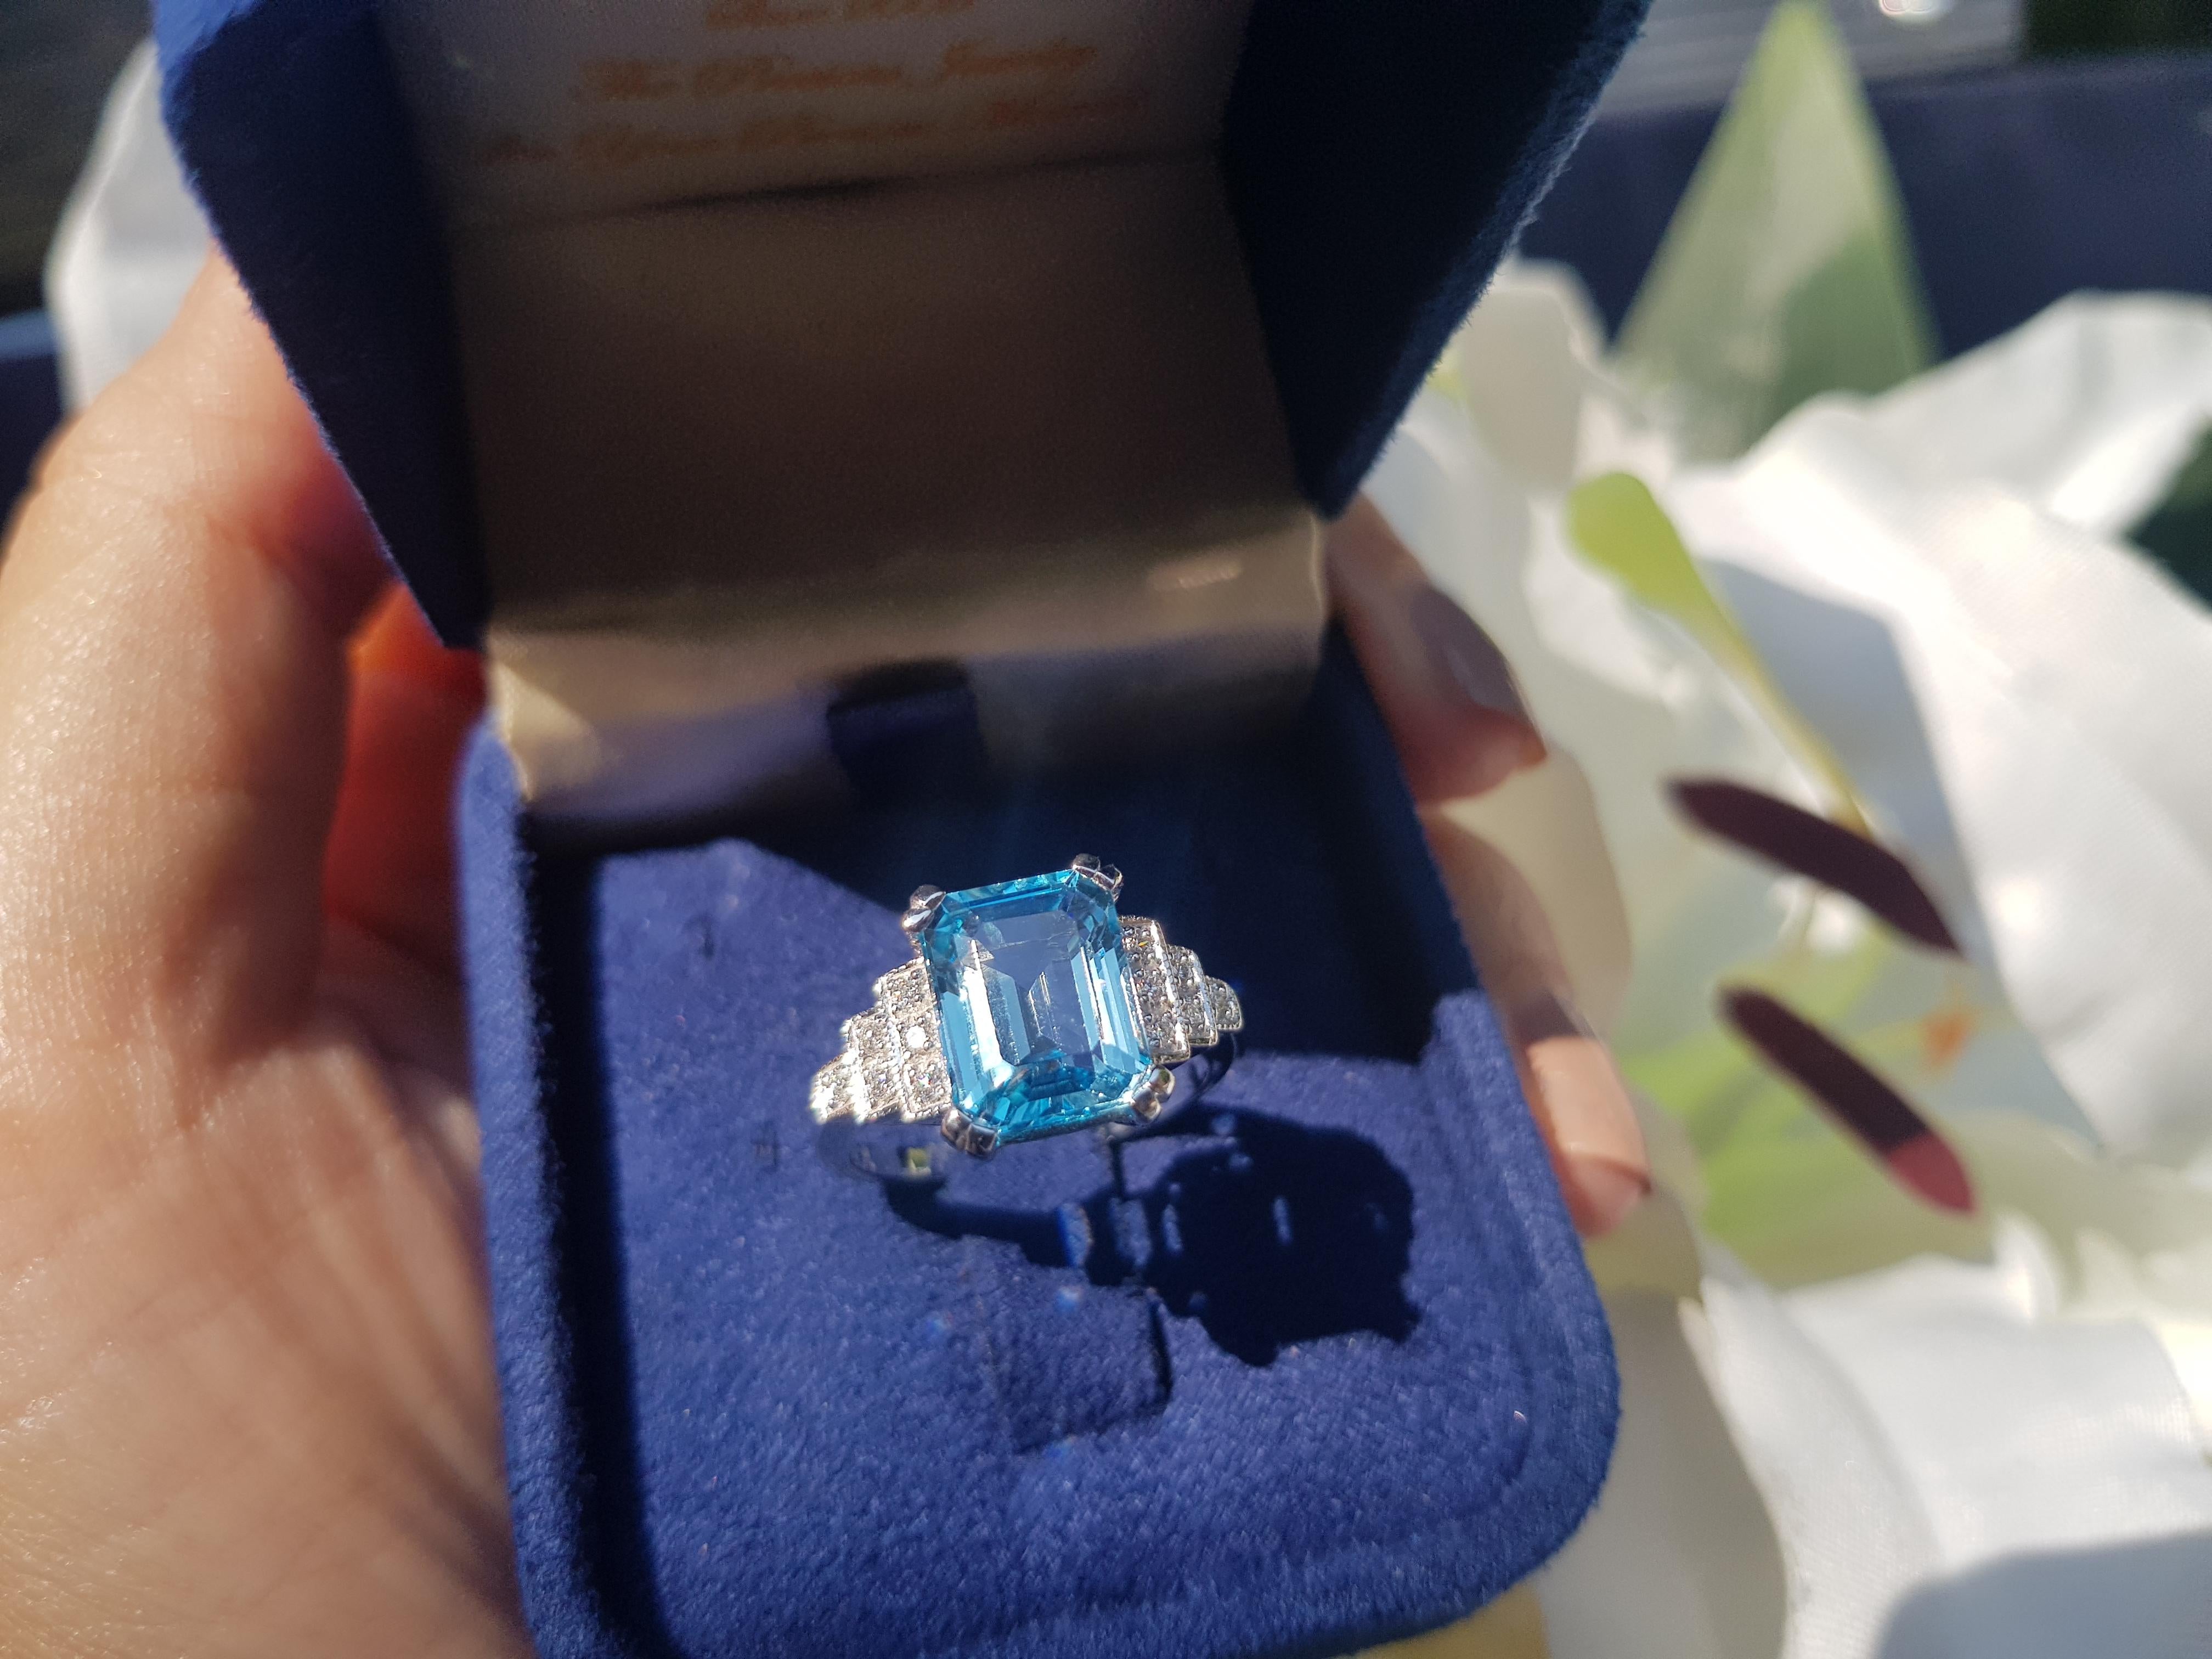 Beautifully crafted in 9k white gold, this gorgeous ring features a striking blue topaz set between step design diamonds set shoulders. With a total 12 diamonds, this exquisite ring is a wonderful addition to your fine jewelry collection.

Ring